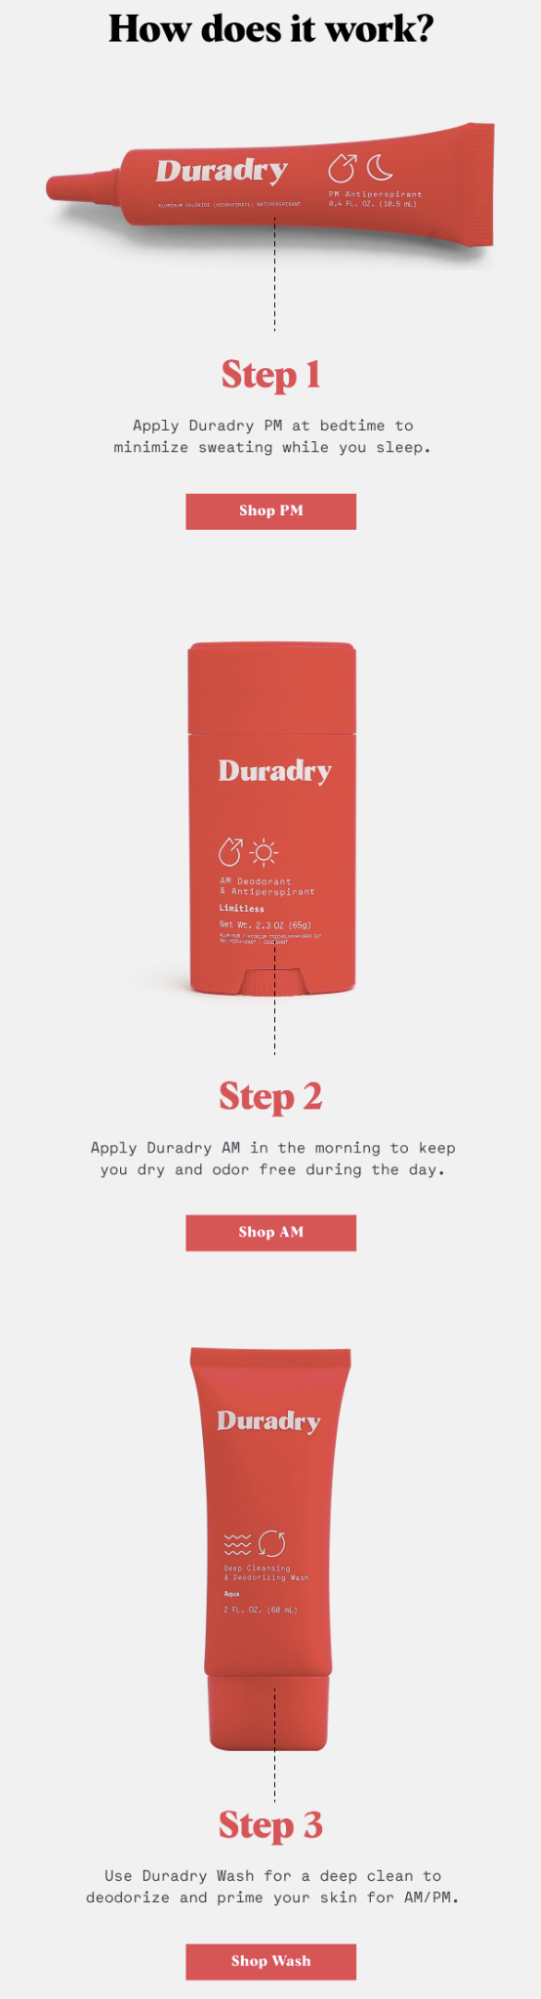 Duradry Product Recommendation Marketing Automation